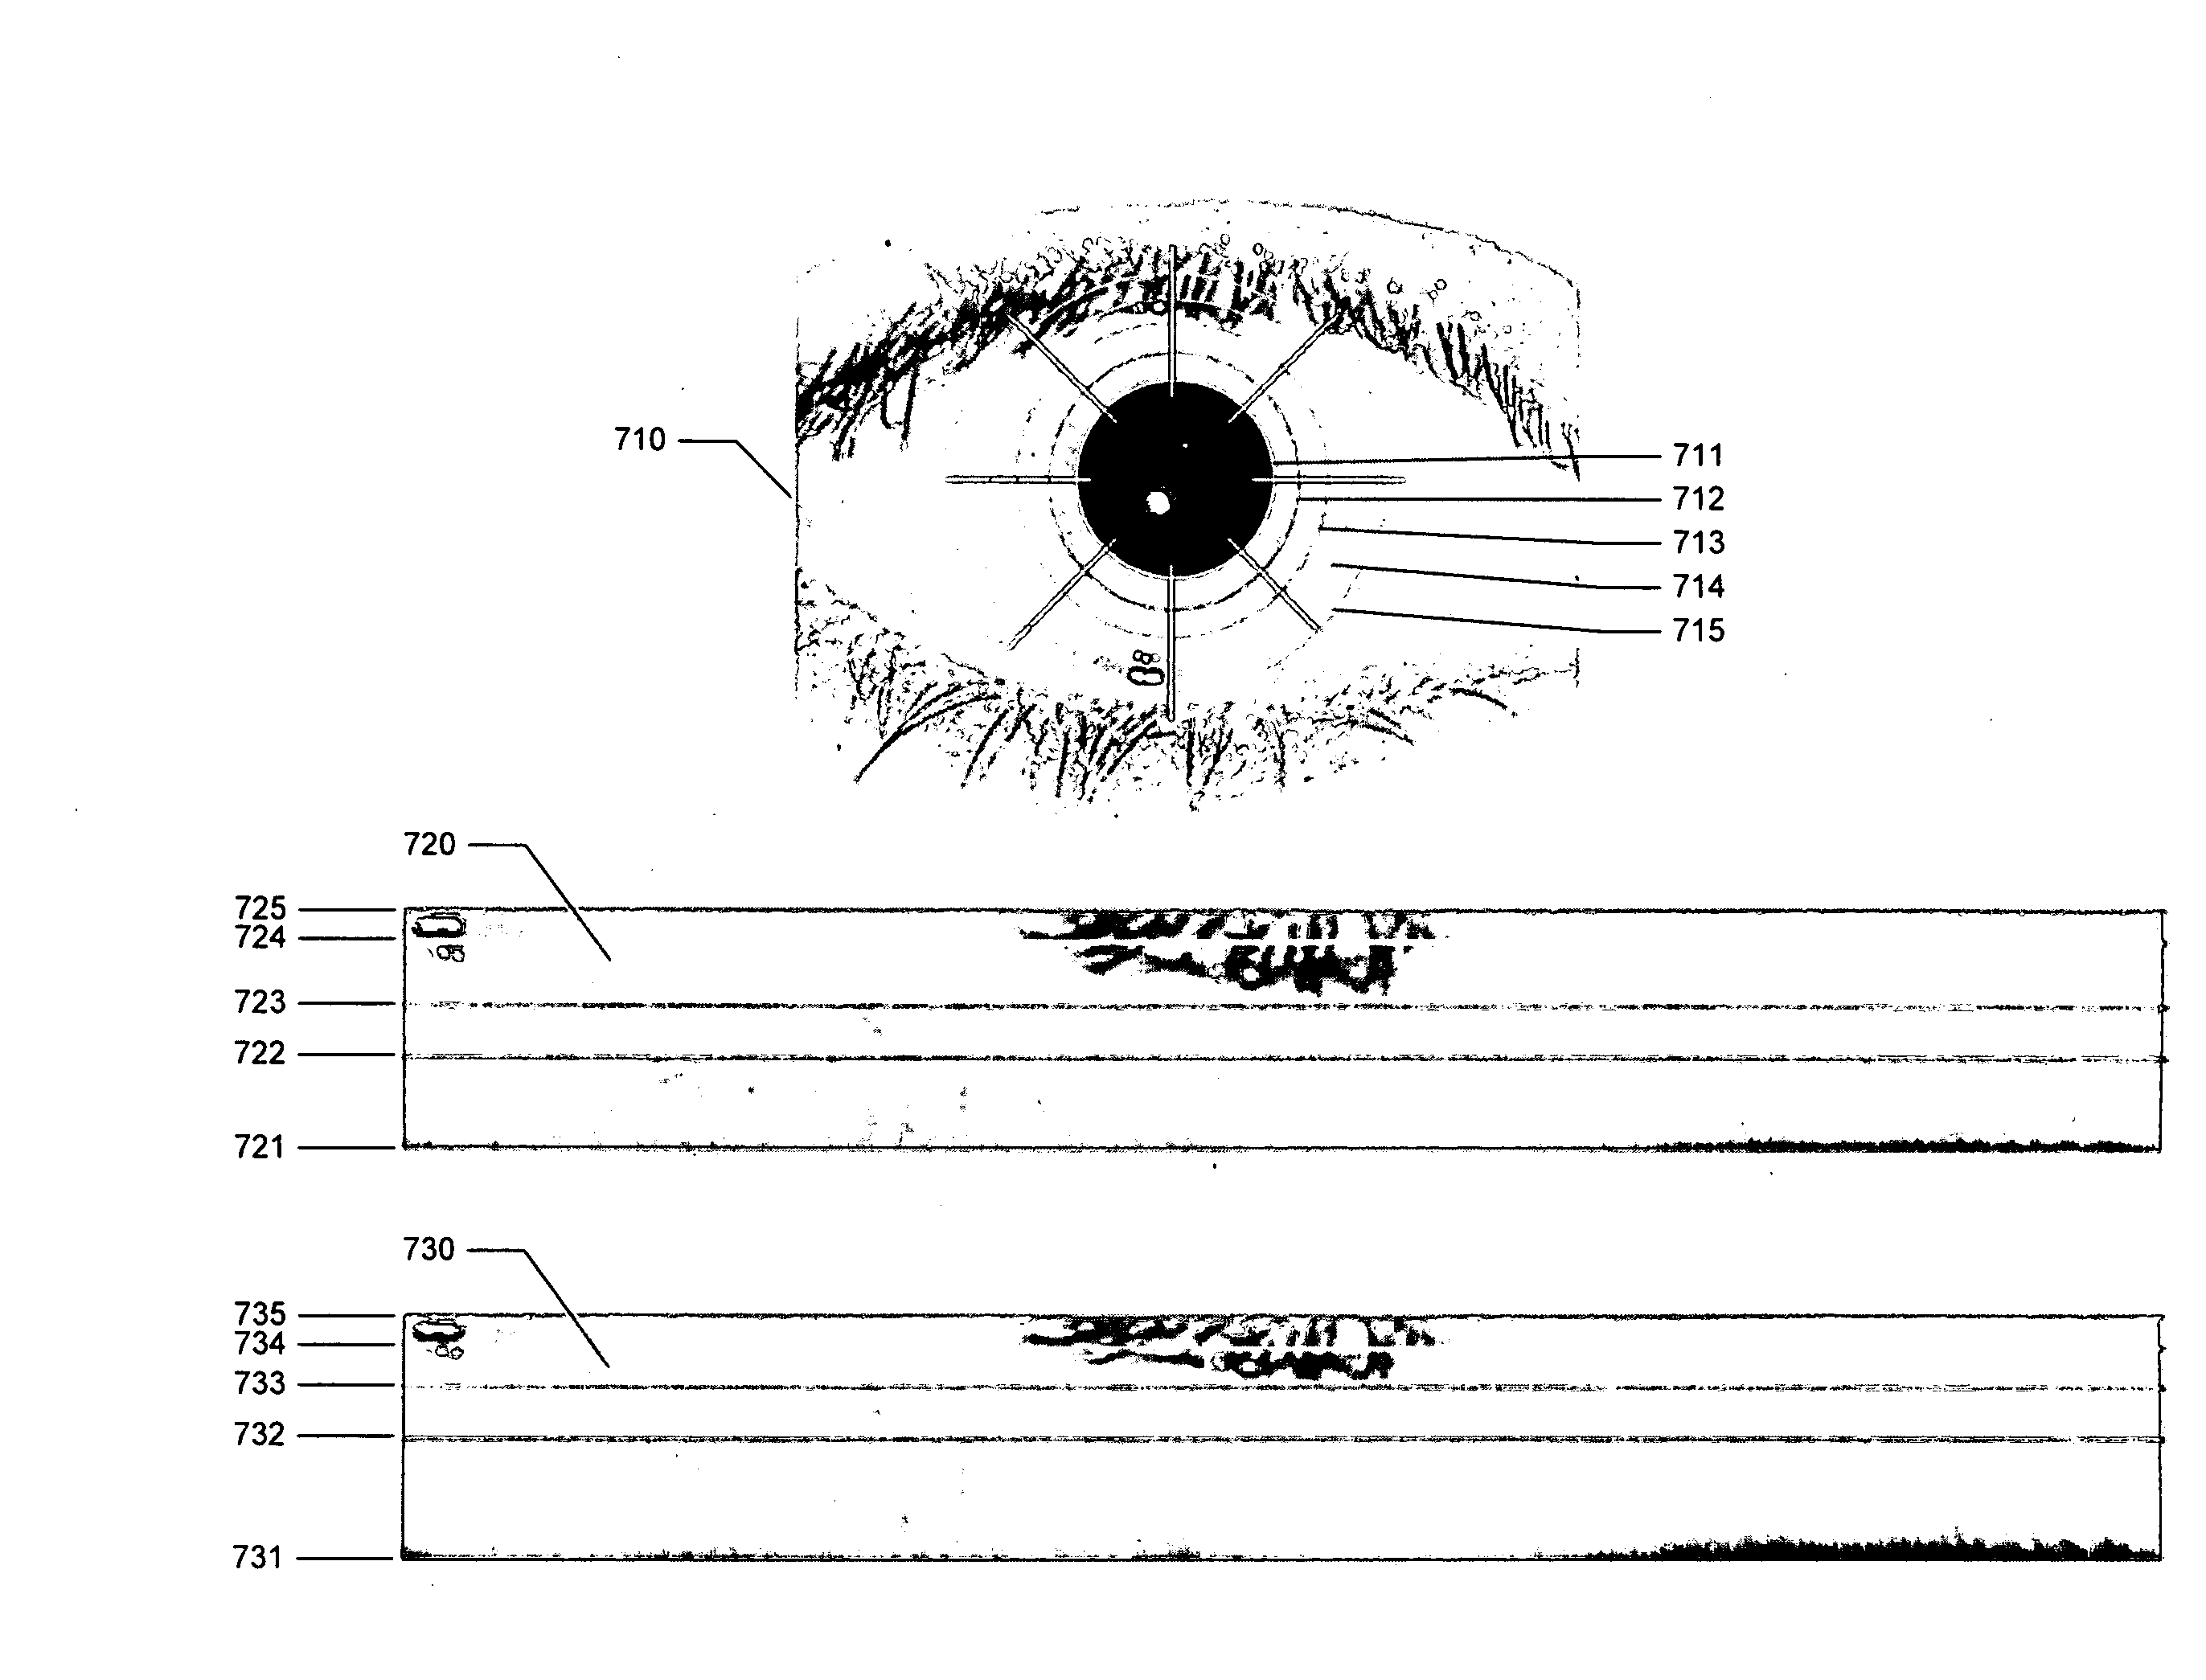 Computationally Efficient Feature Extraction and Matching Iris Recognition